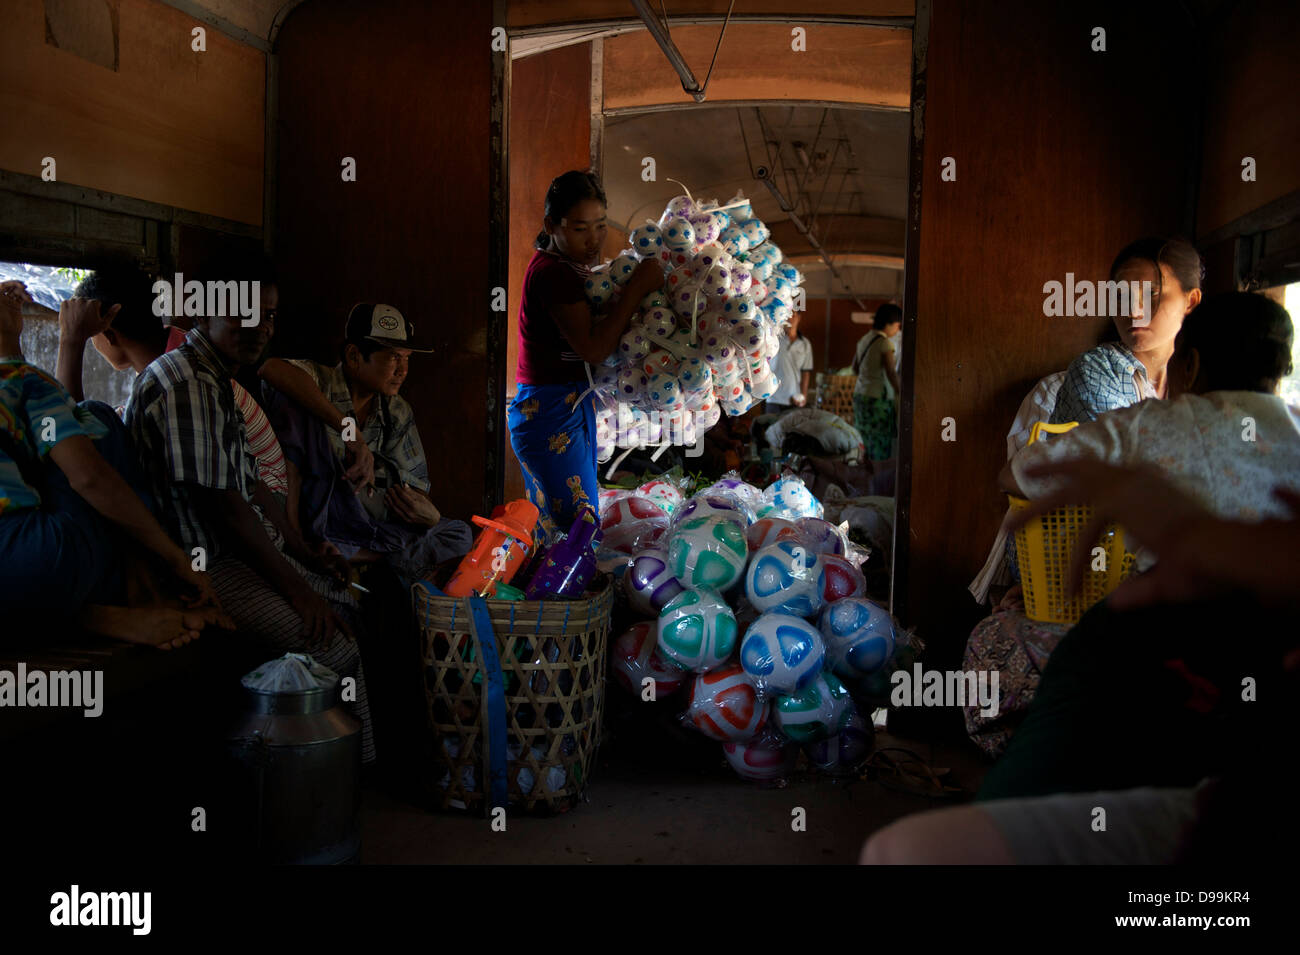 vendors carrying their merchandise inside the train in Yangon Stock Photo